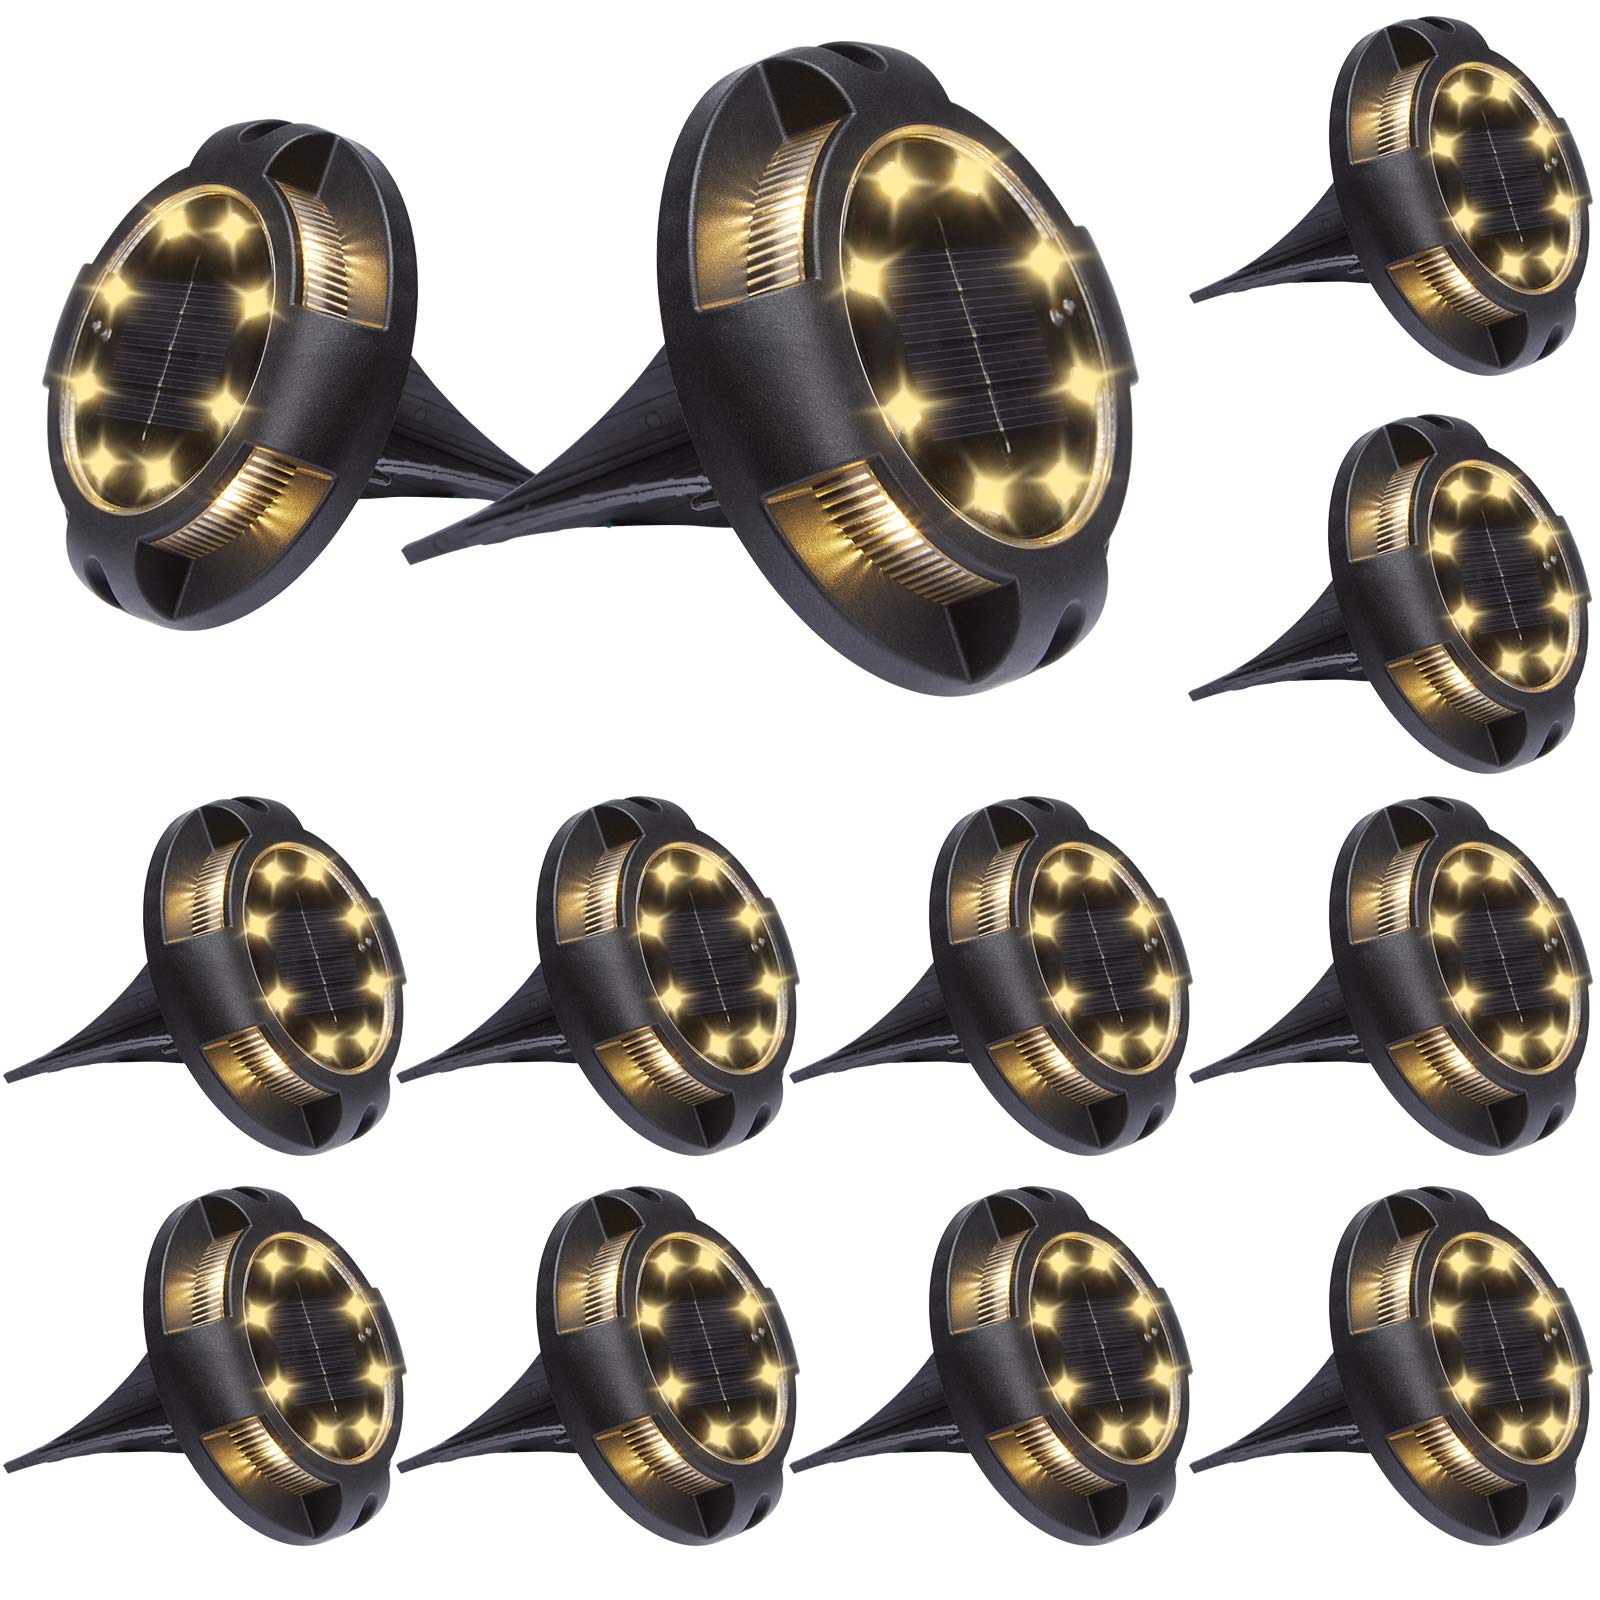 Solar Ground Lights Outdoor 12 Packs 12 Disk Lights Solar Powered Waterproof New In-ground Lights for Garden Deck Stair Step Lawn Patio Driveway Walkway Pathway Yard Decoration (Warm Light, 12 Pack)